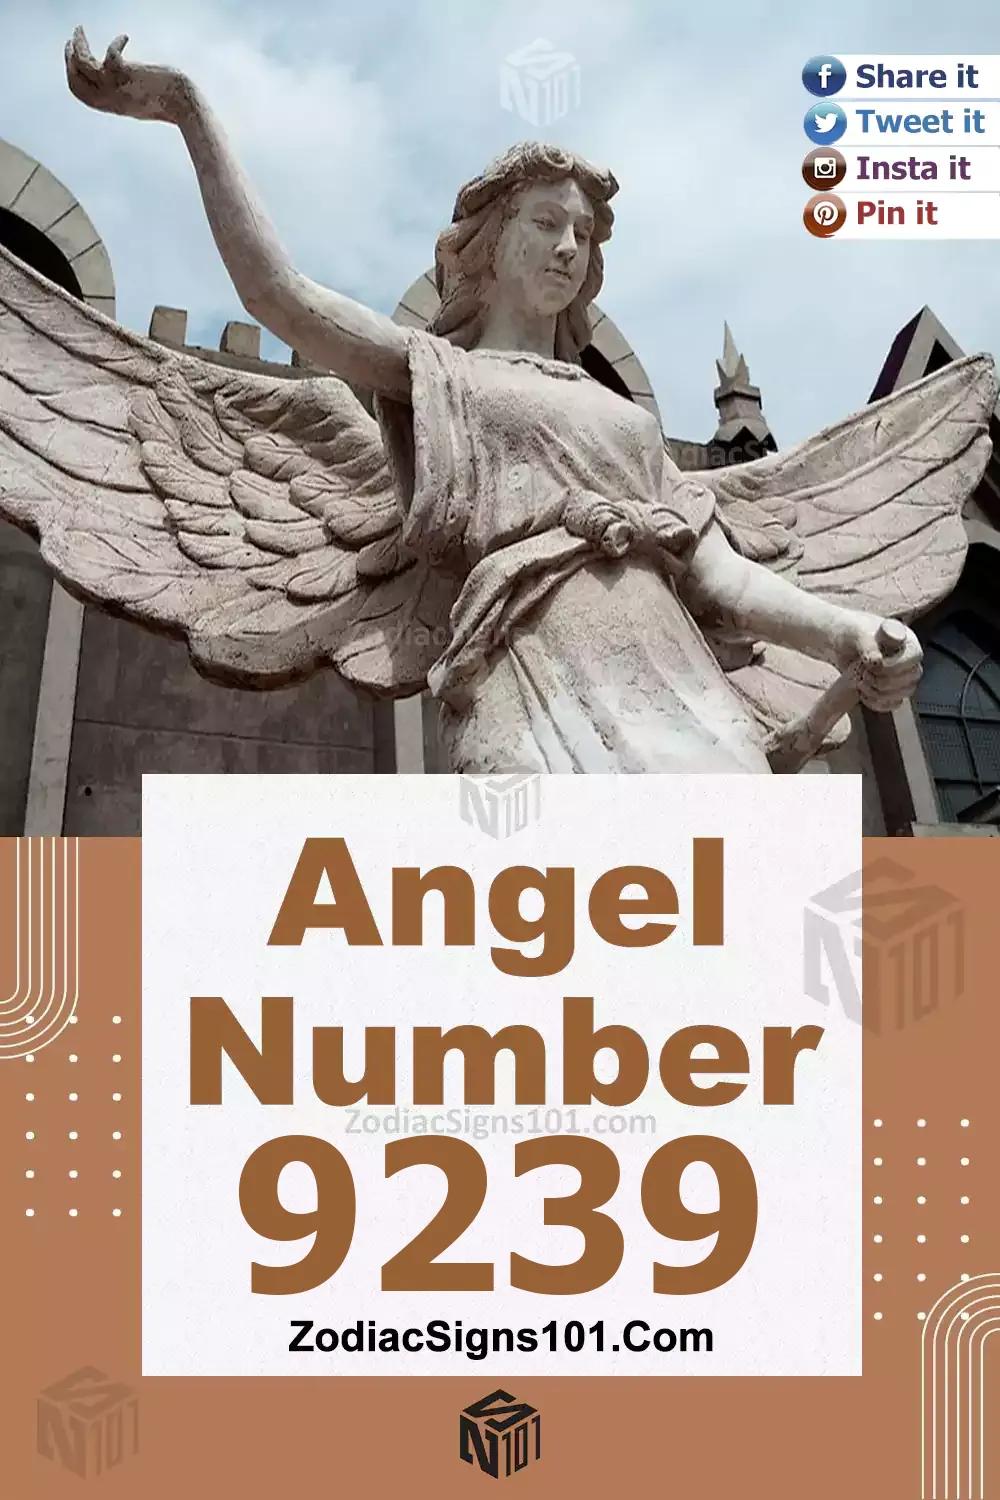 9239 Angel Number Meaning